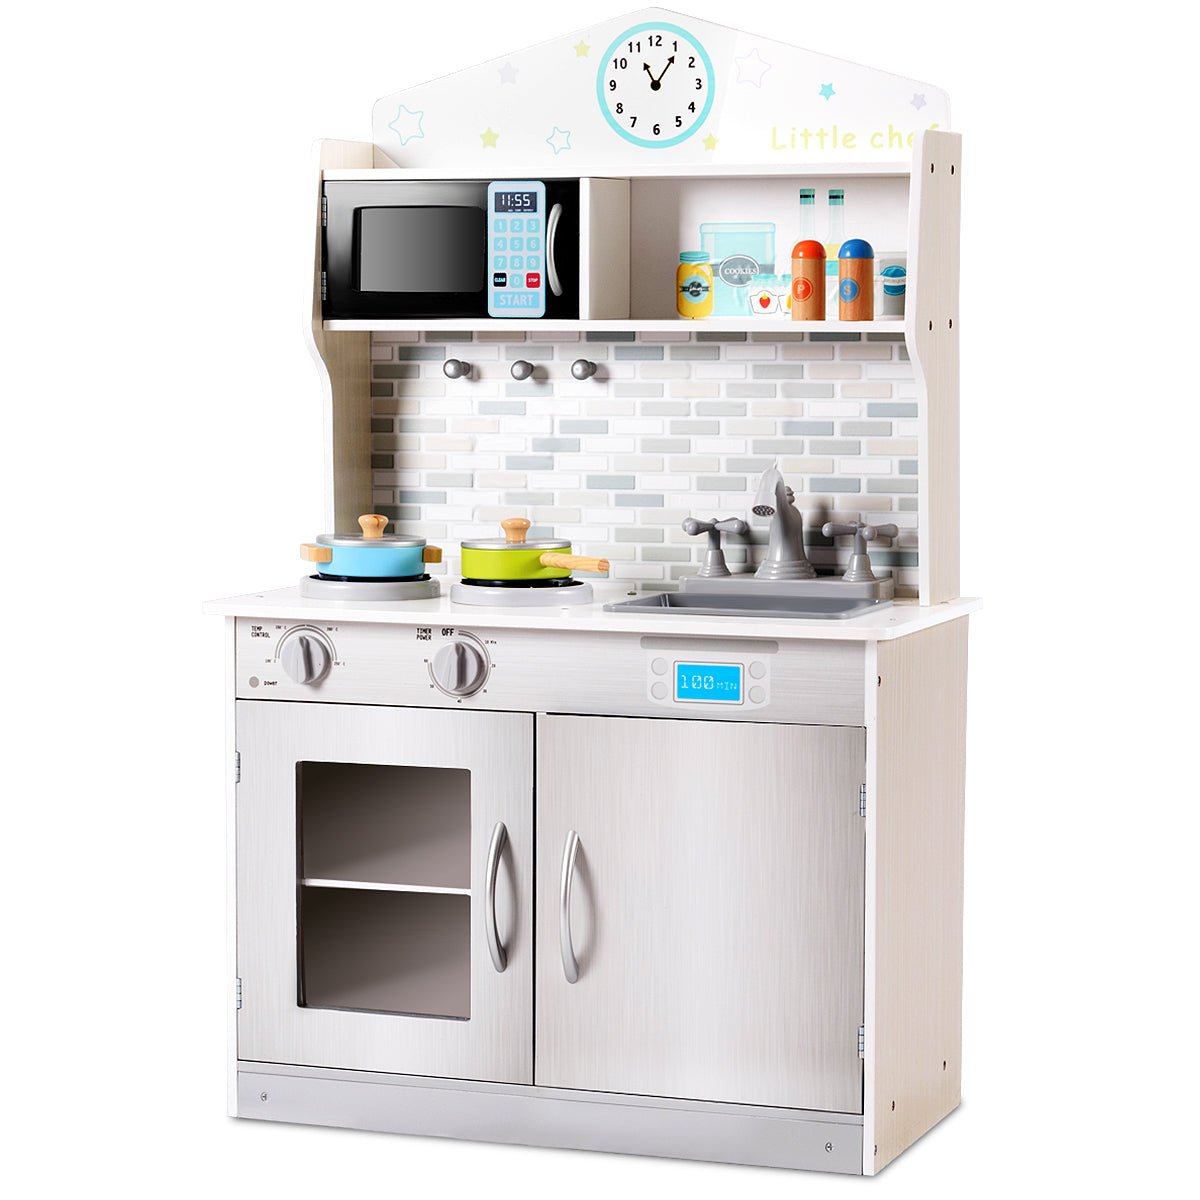 Wooden Toy Kitchen Playset - Grey Microwave Included